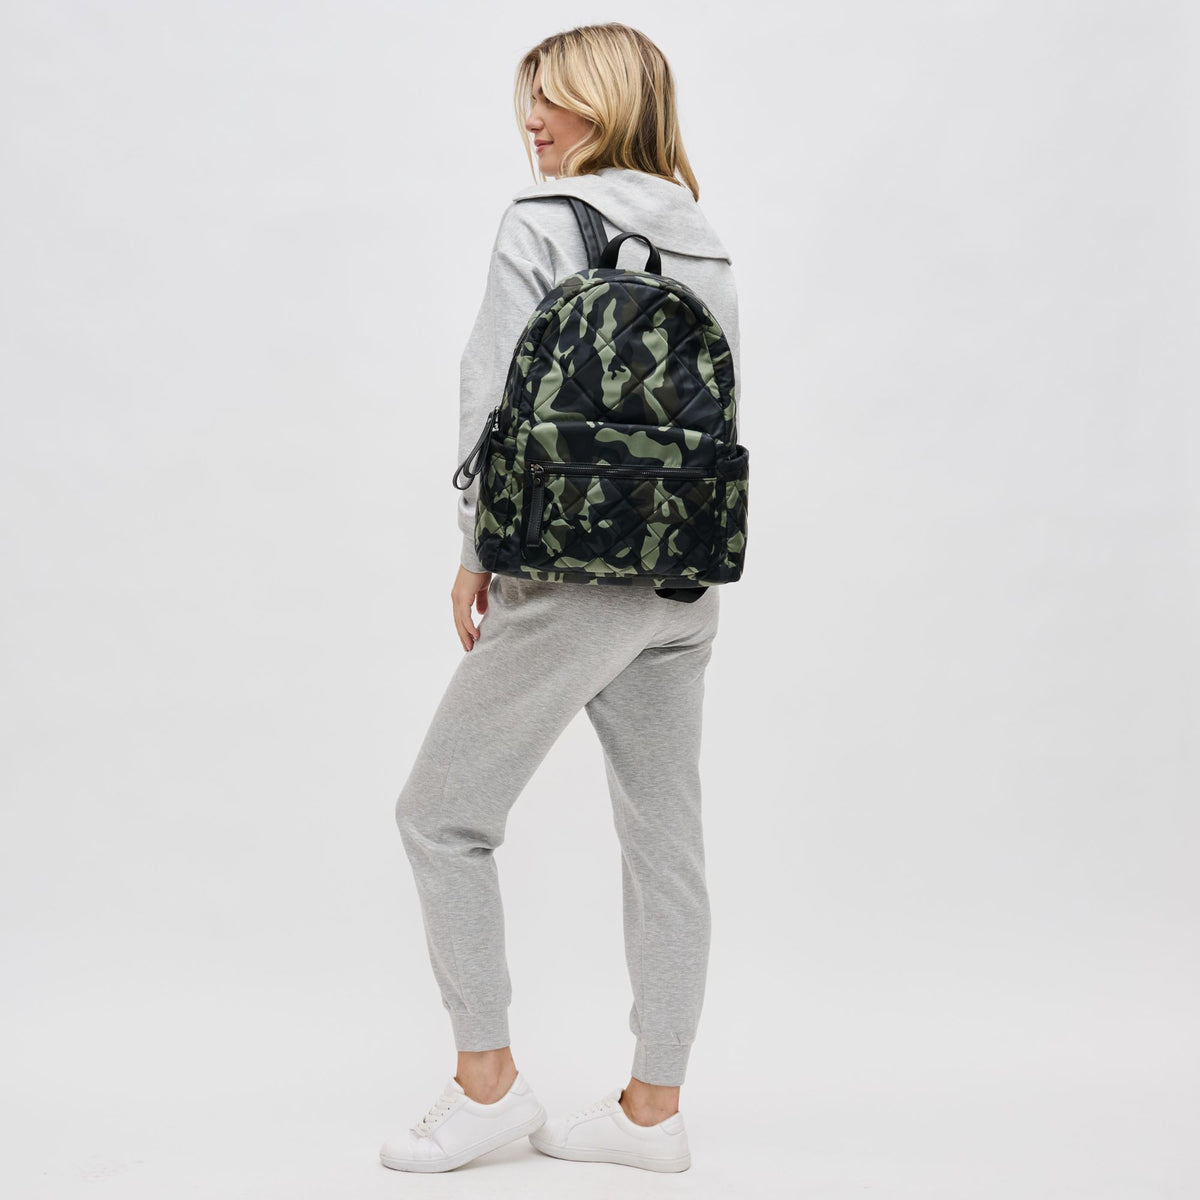 Woman wearing Camo Sol and Selene Motivator - Large Travel Backpack 841764106580 View 3 | Camo